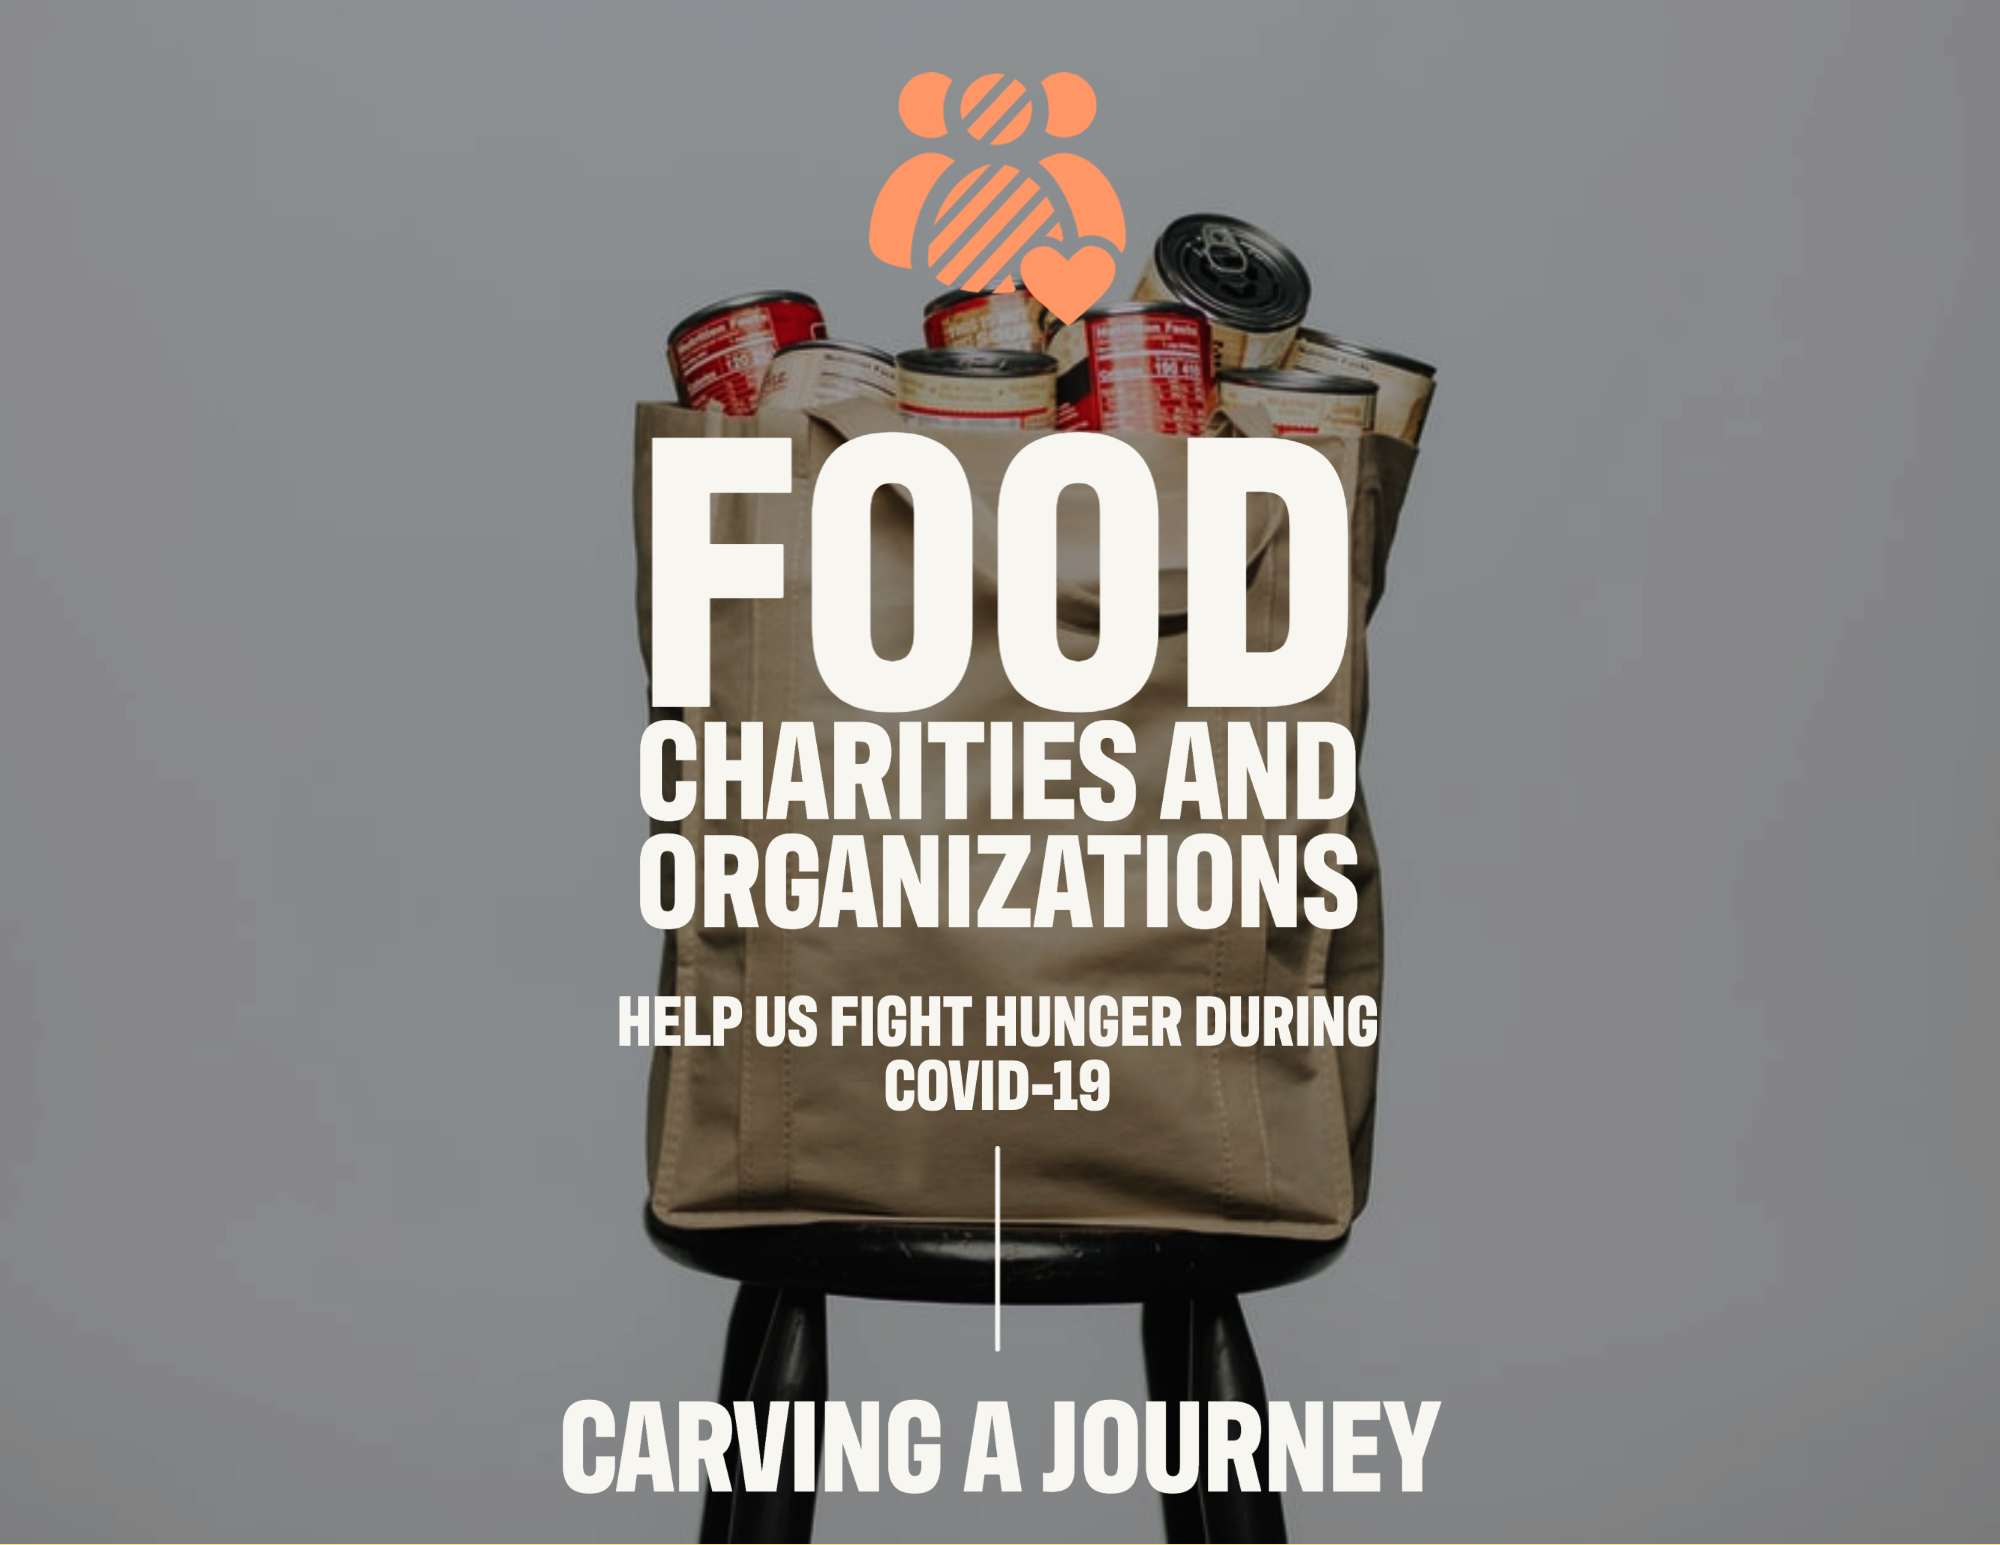 Food Charities Helping Communities Carving A Journey